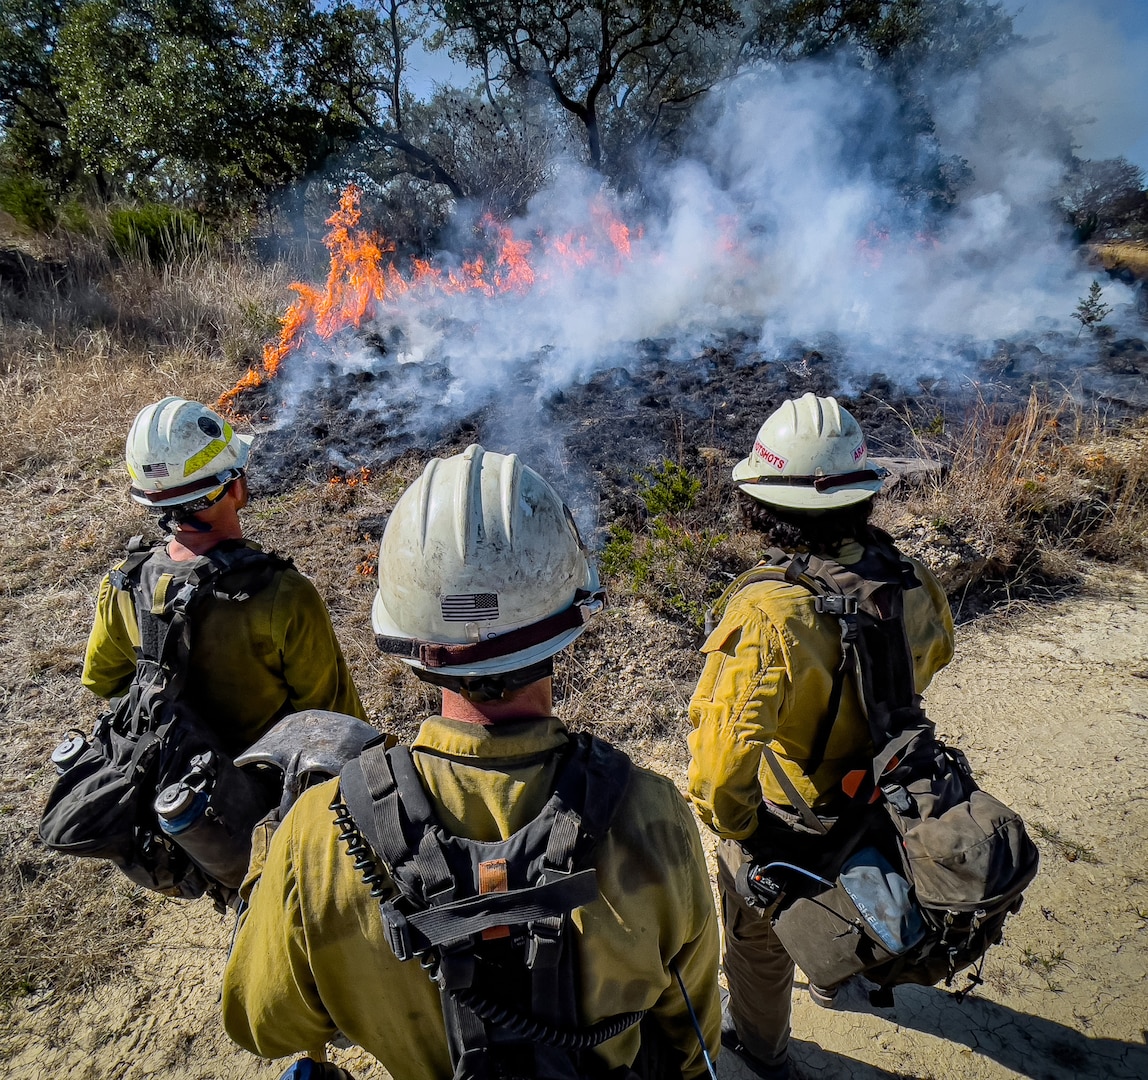 Members of Joint Base San Antonio’s Natural Resources Office, Fire & Emergency Services, and Air Force Wildland Fire Branch officials conduct a prescribed burn